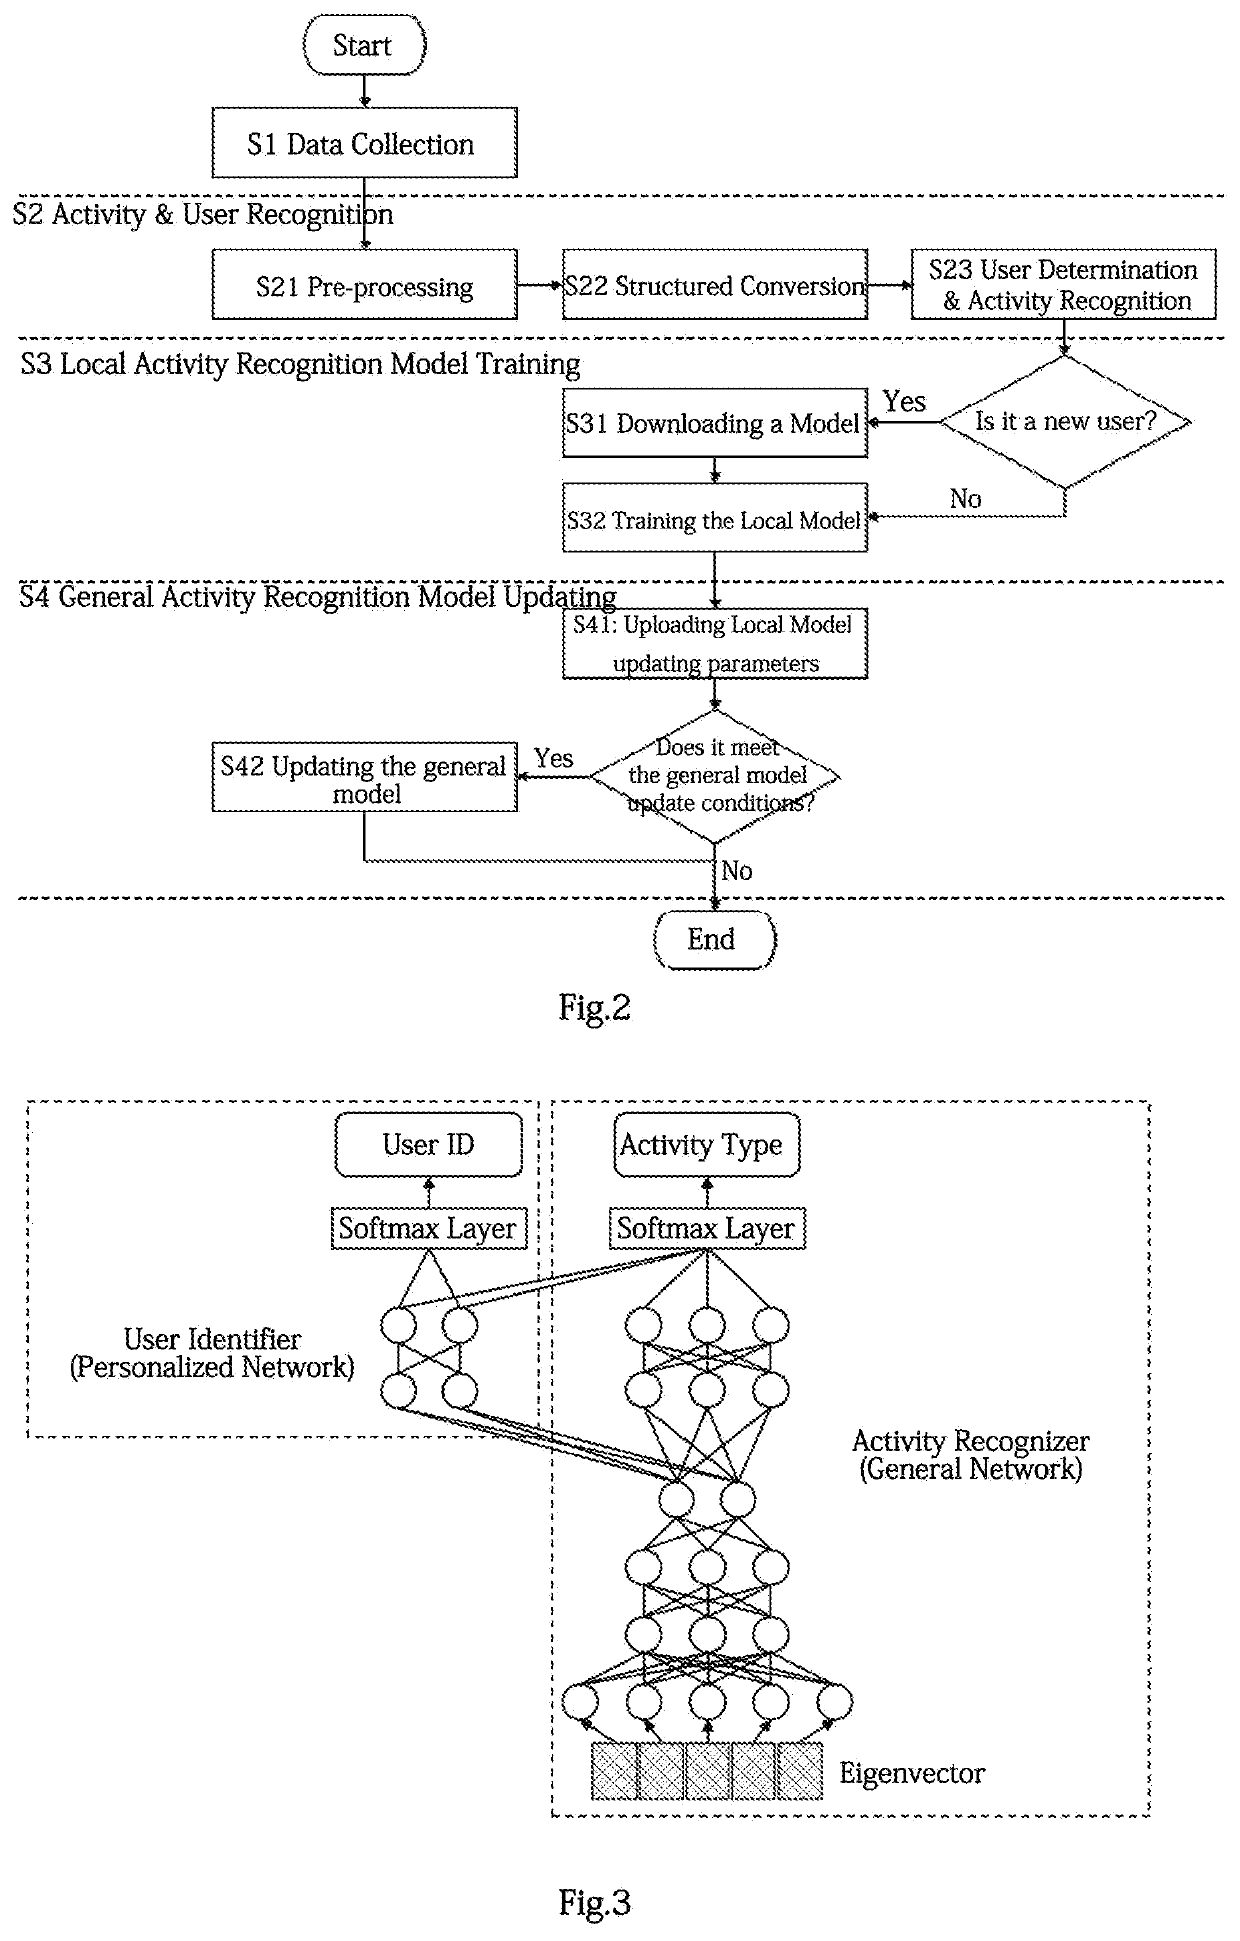 Activity recognition model balanced between versatility and individuation and system thereof